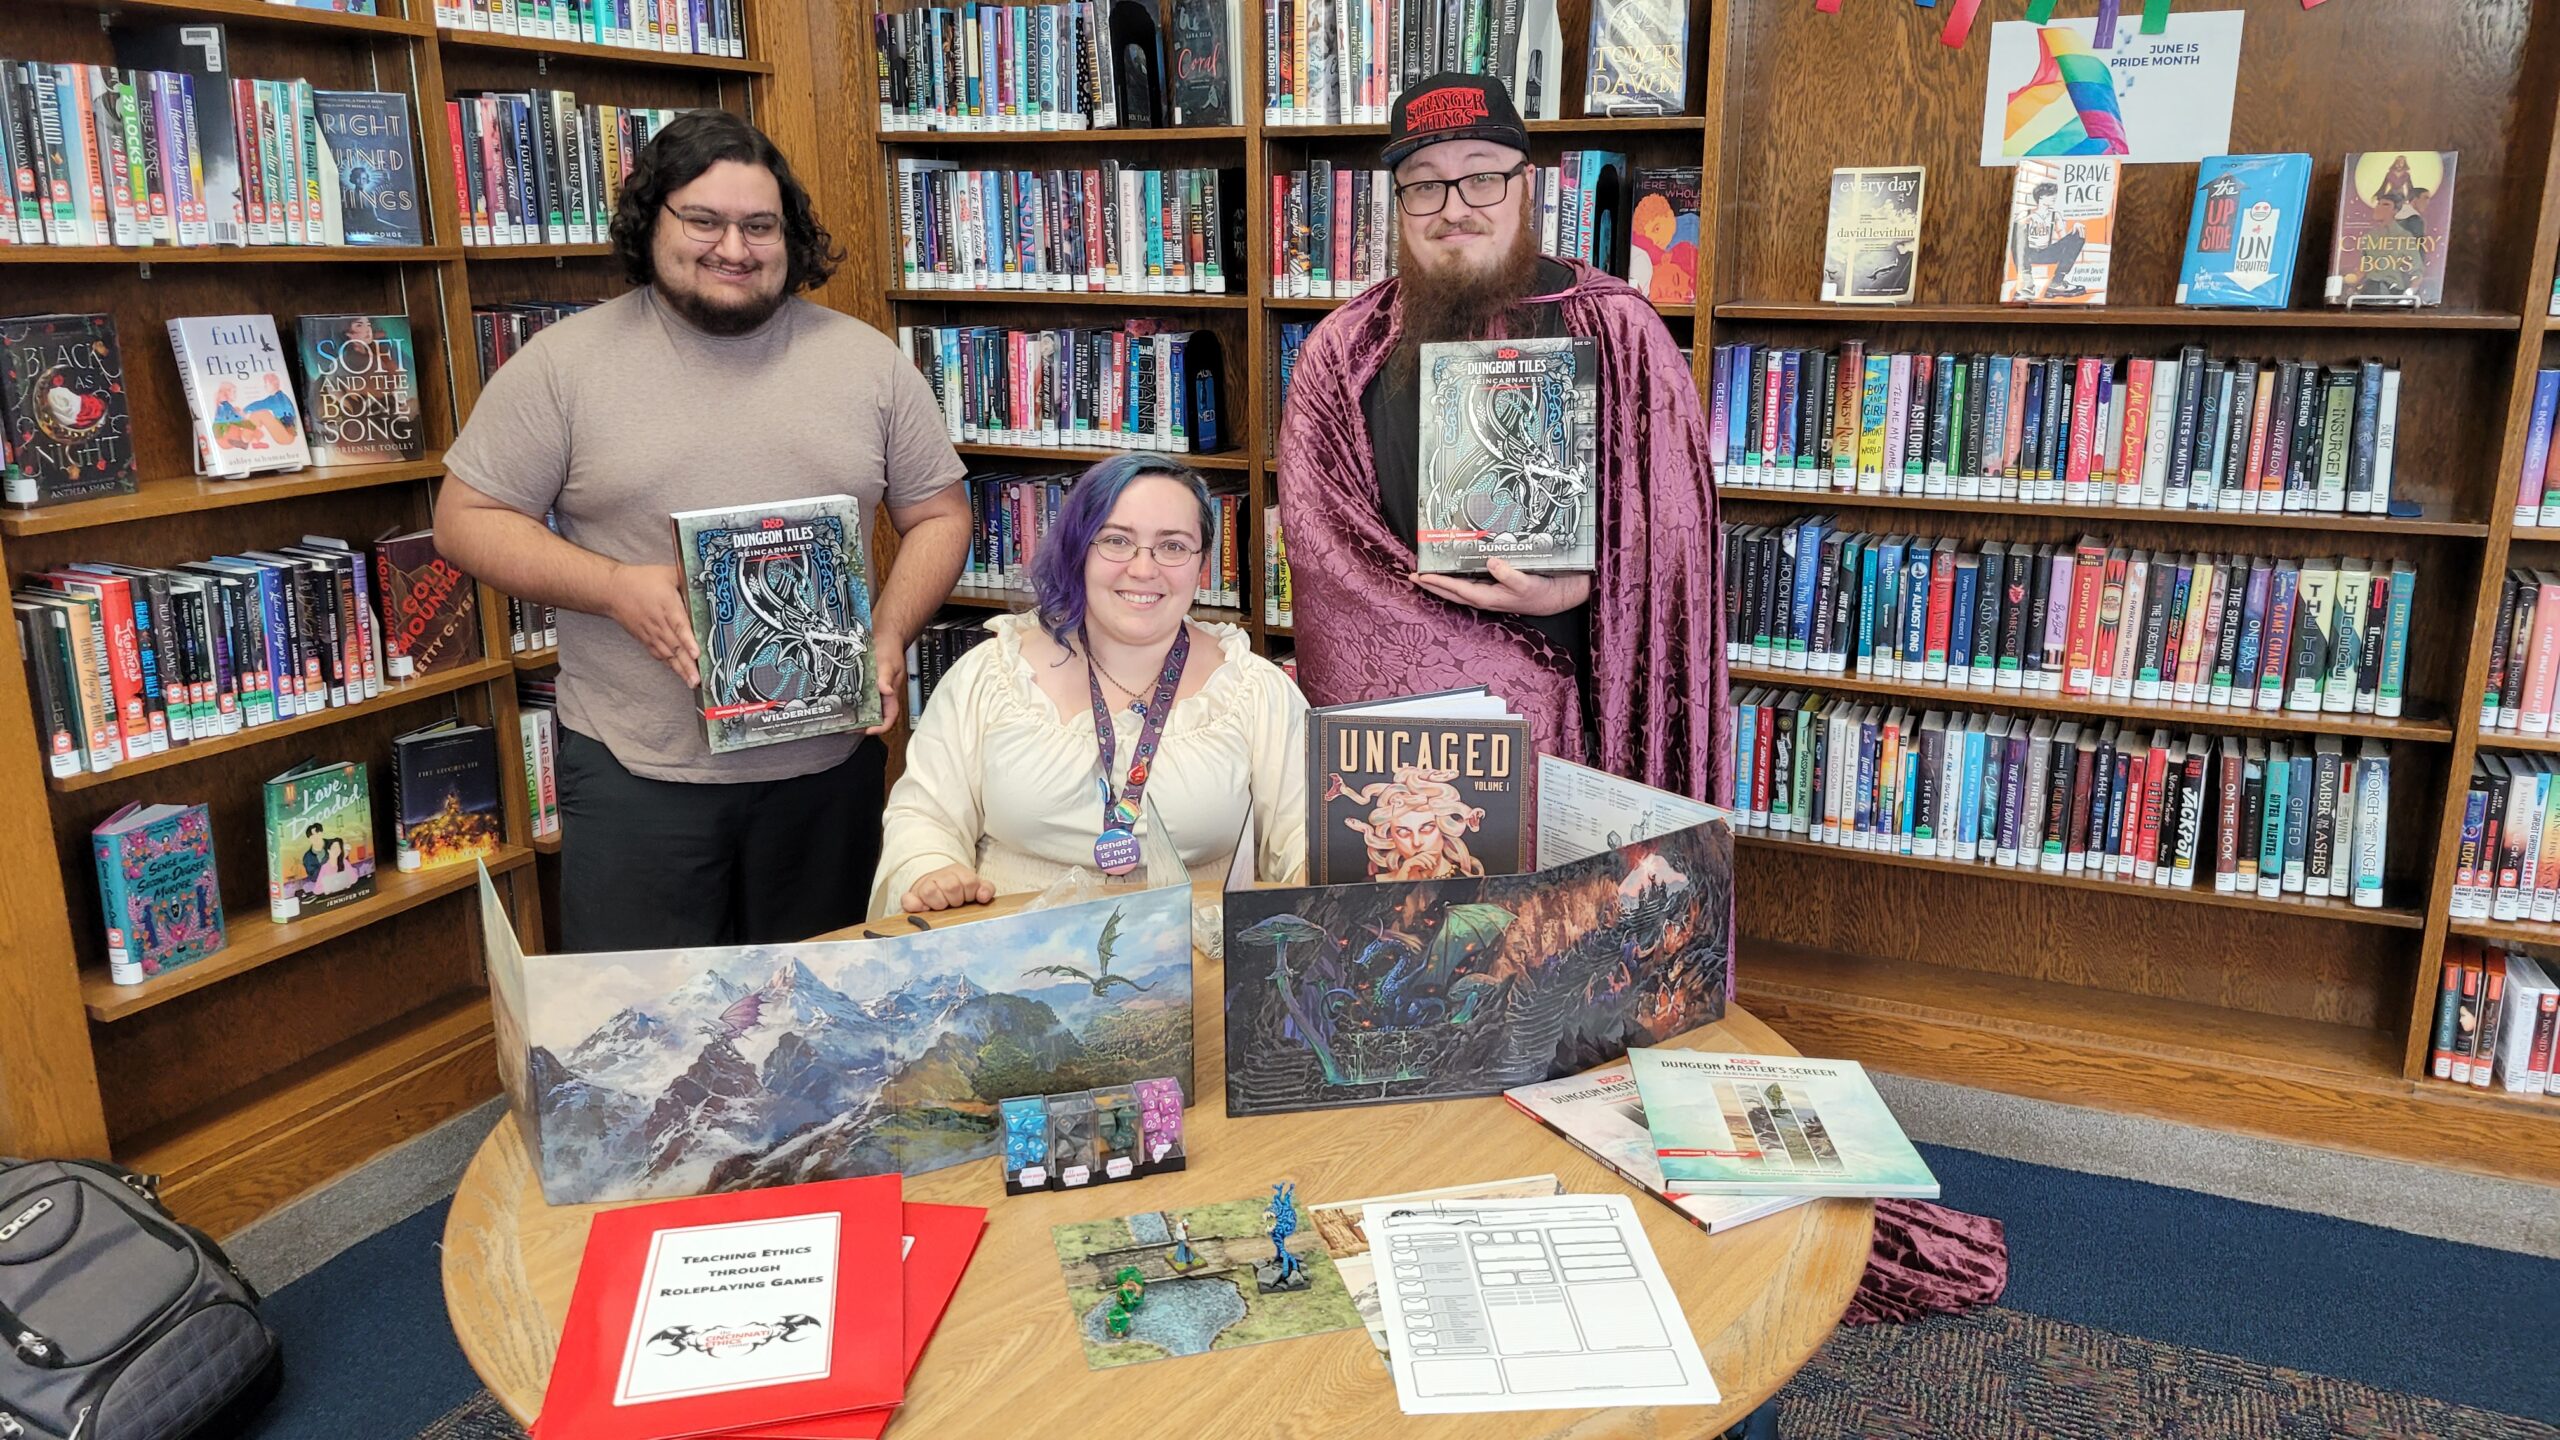 Cincinnati Ethics Center Partners with Cincinnati & Hamilton County Public Library to Teach Ethics through Roleplaying Games